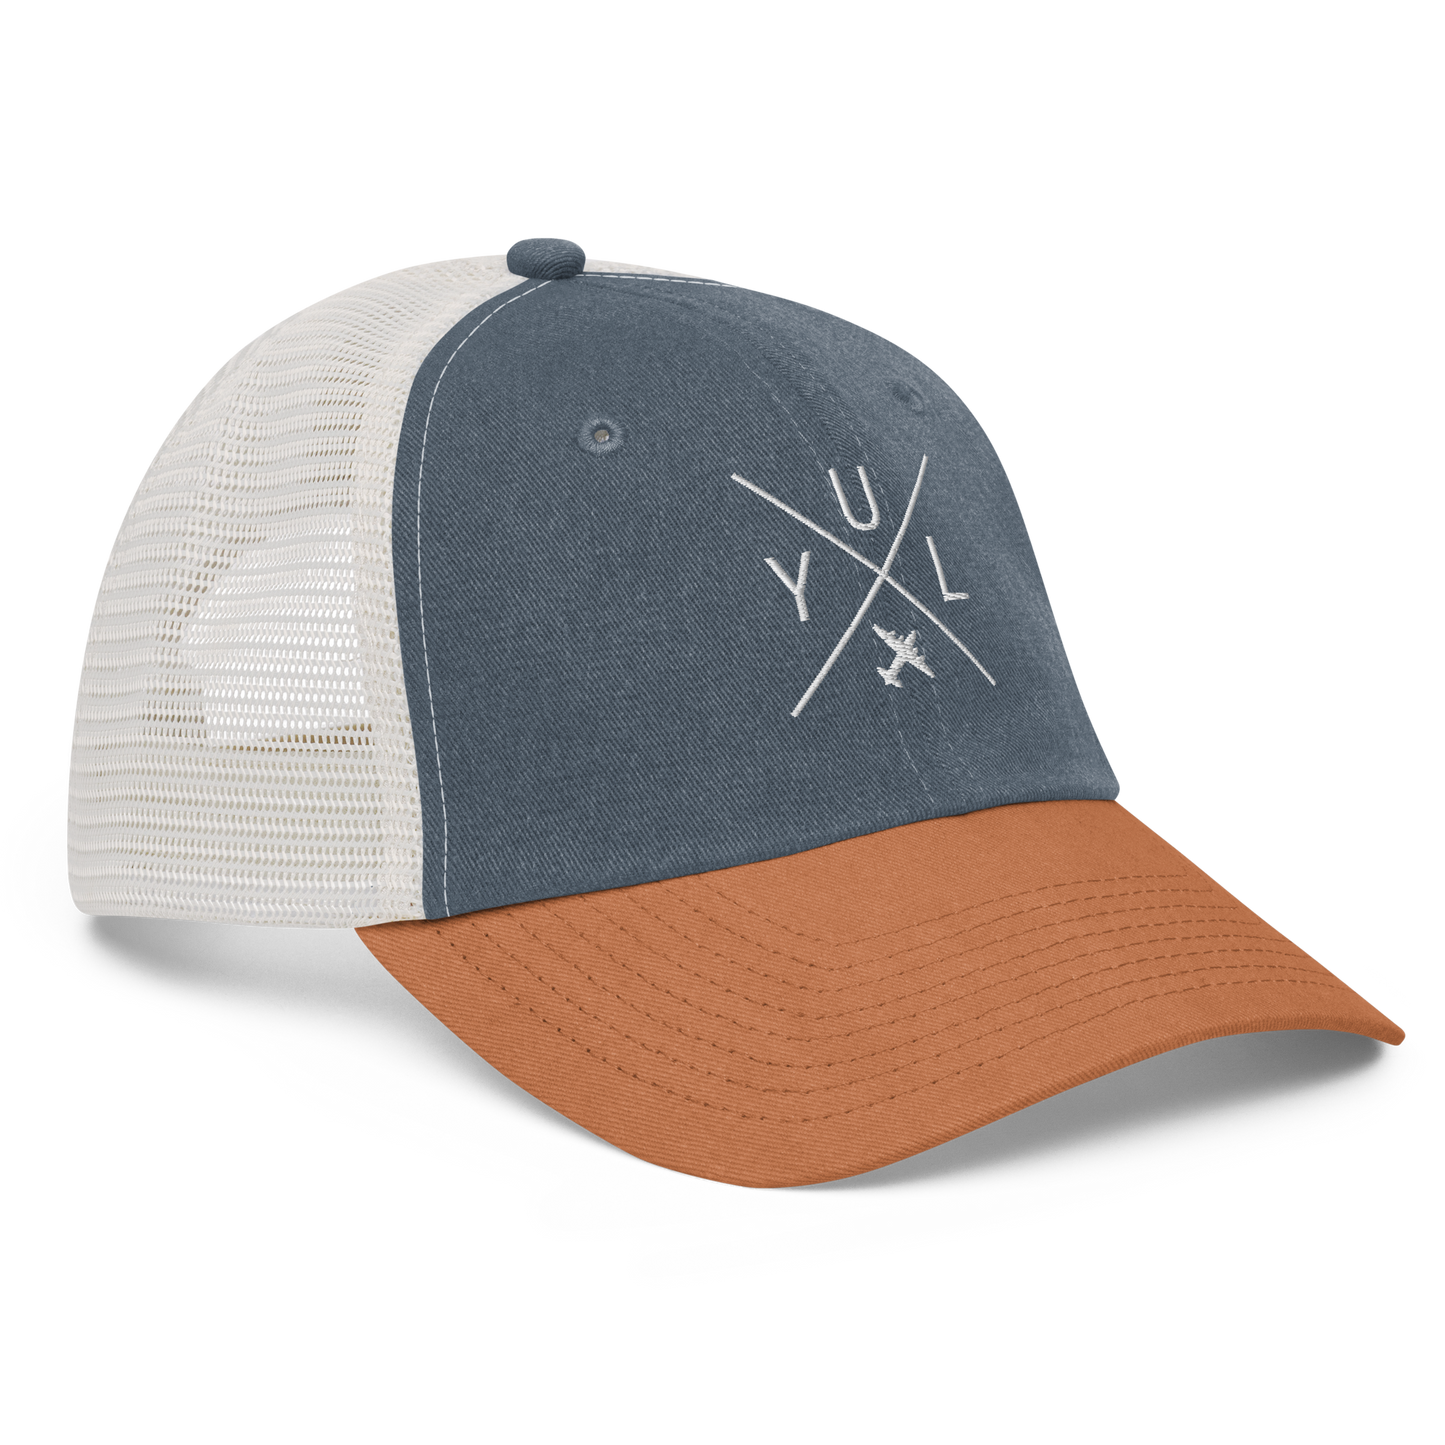 YHM Designs - YUL Montreal Pigment-Dyed Trucker Cap - Crossed-X Design with Airport Code and Vintage Propliner - White Embroidery - Image 16